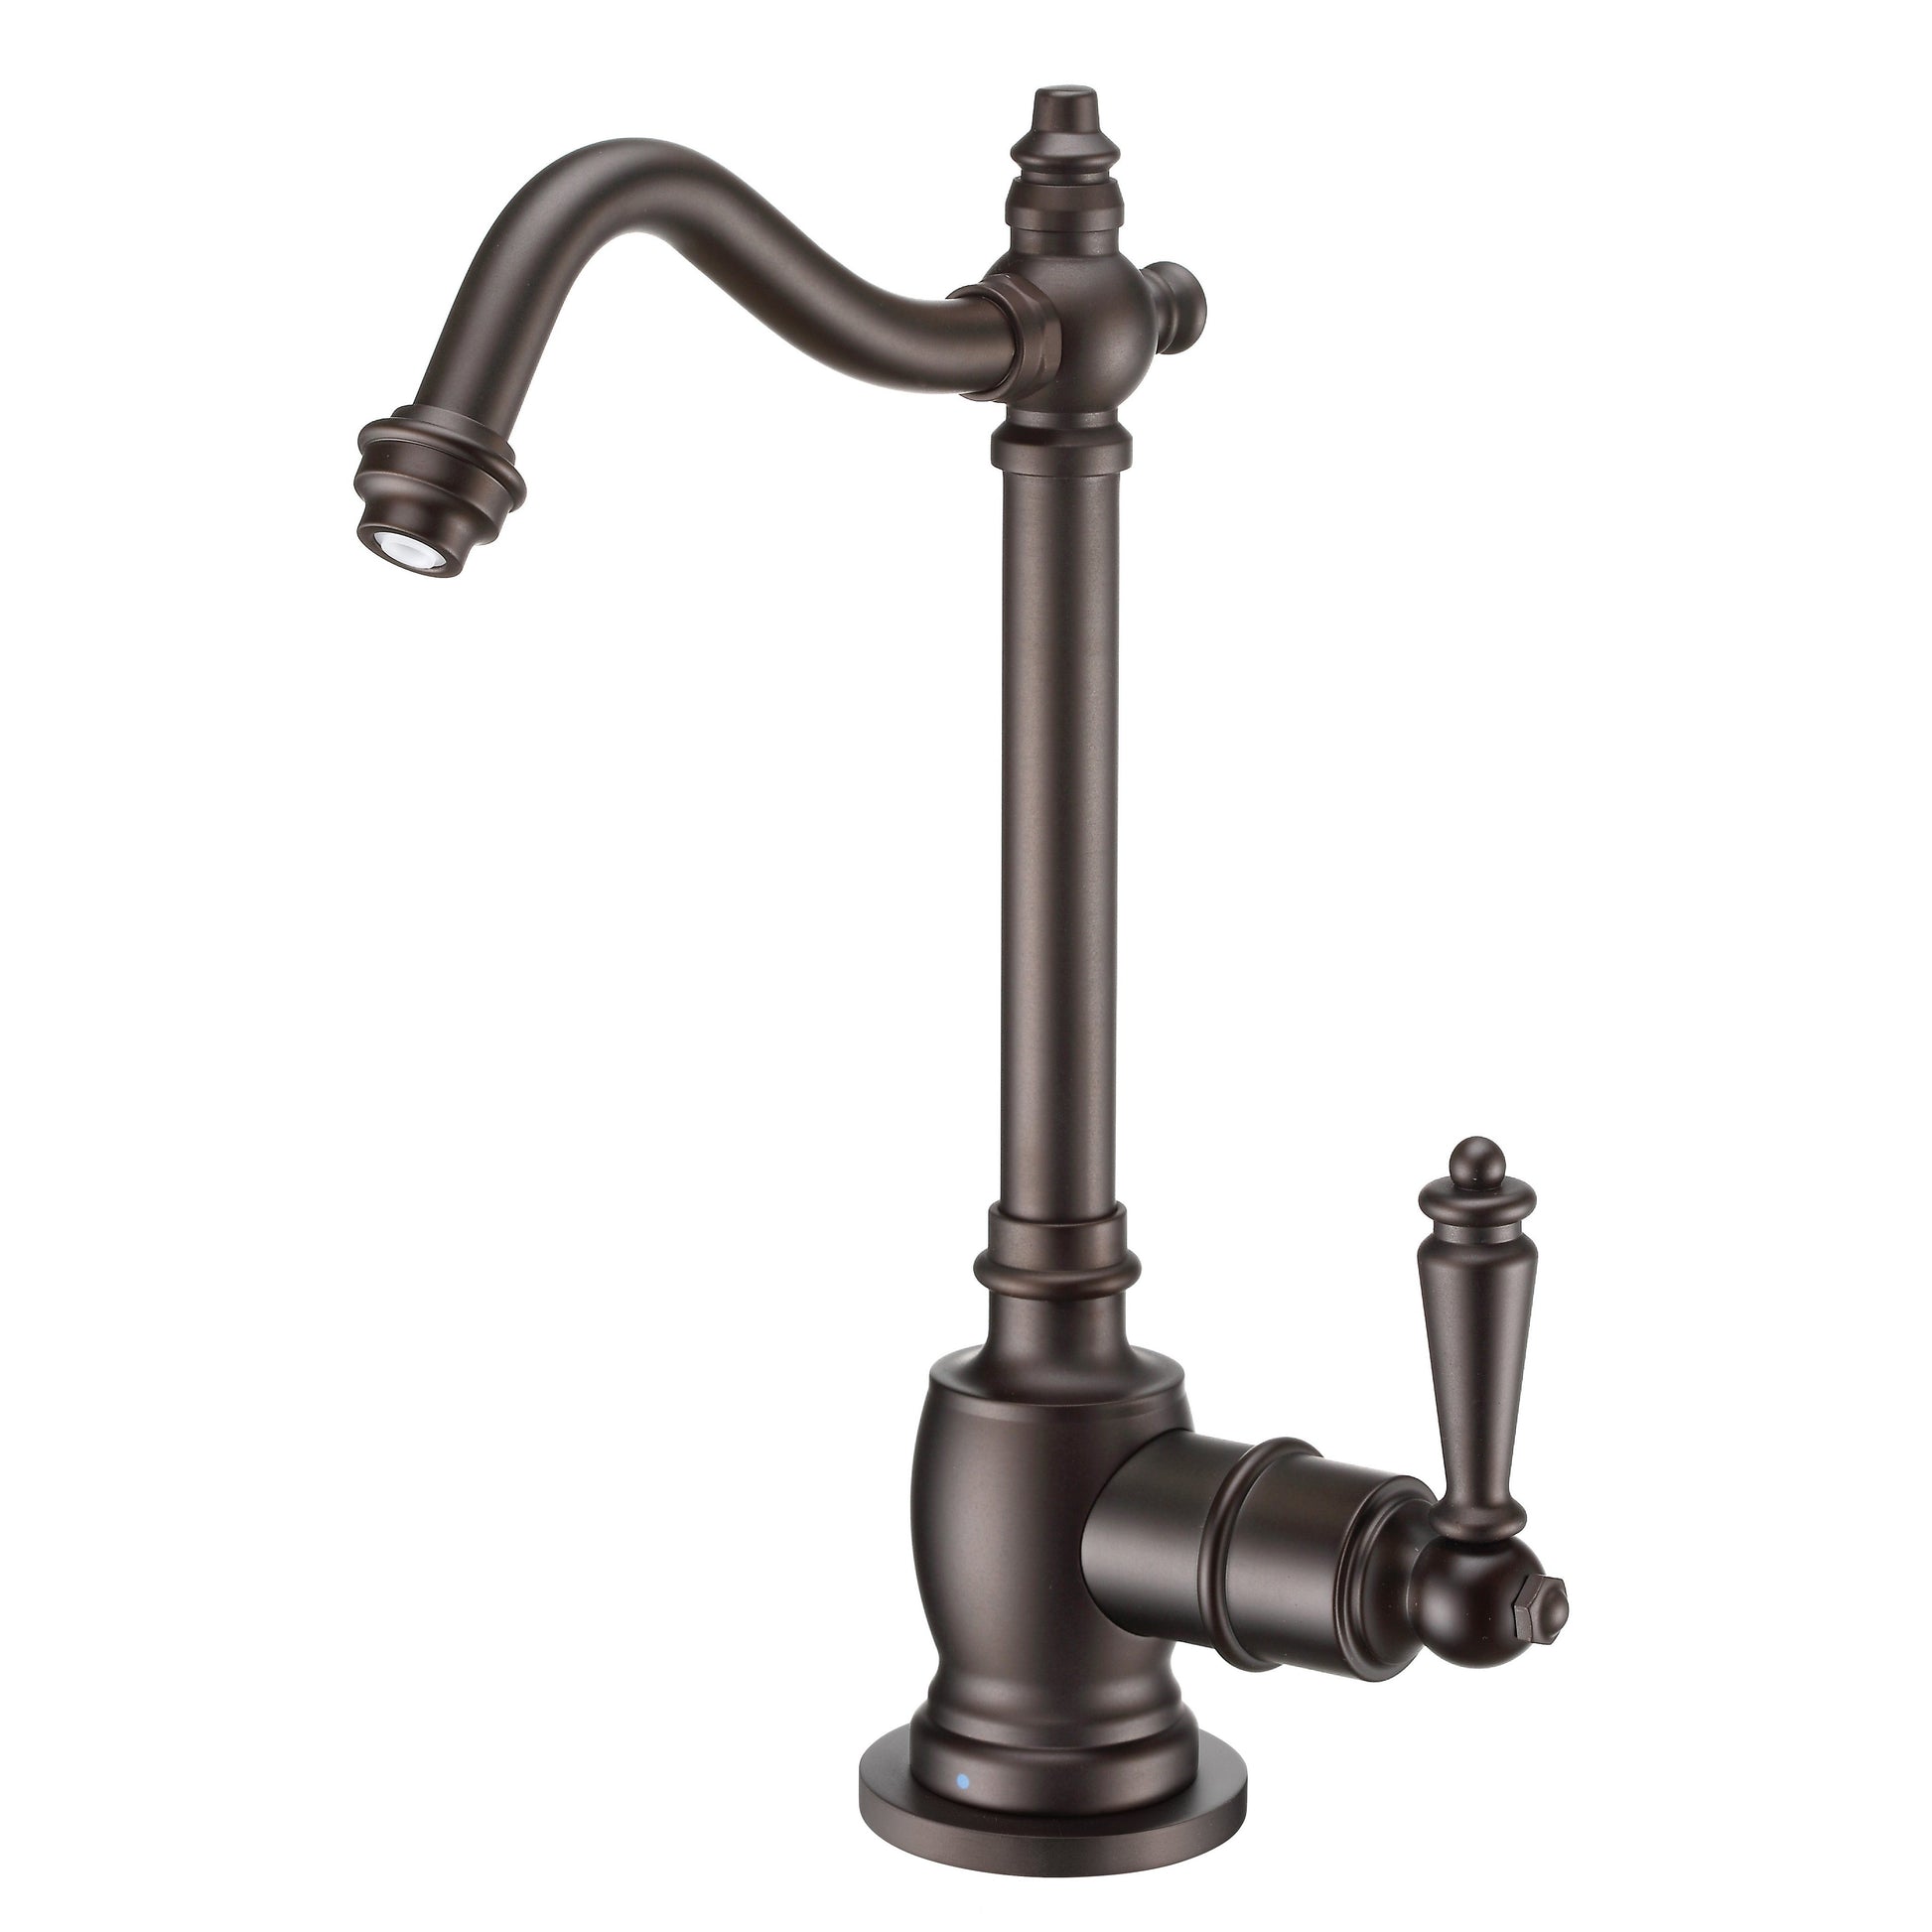 Whitehaus WHFH-C1006-ORB Point of Use Cold Water Drinking Faucet with Traditional Swivel Spout